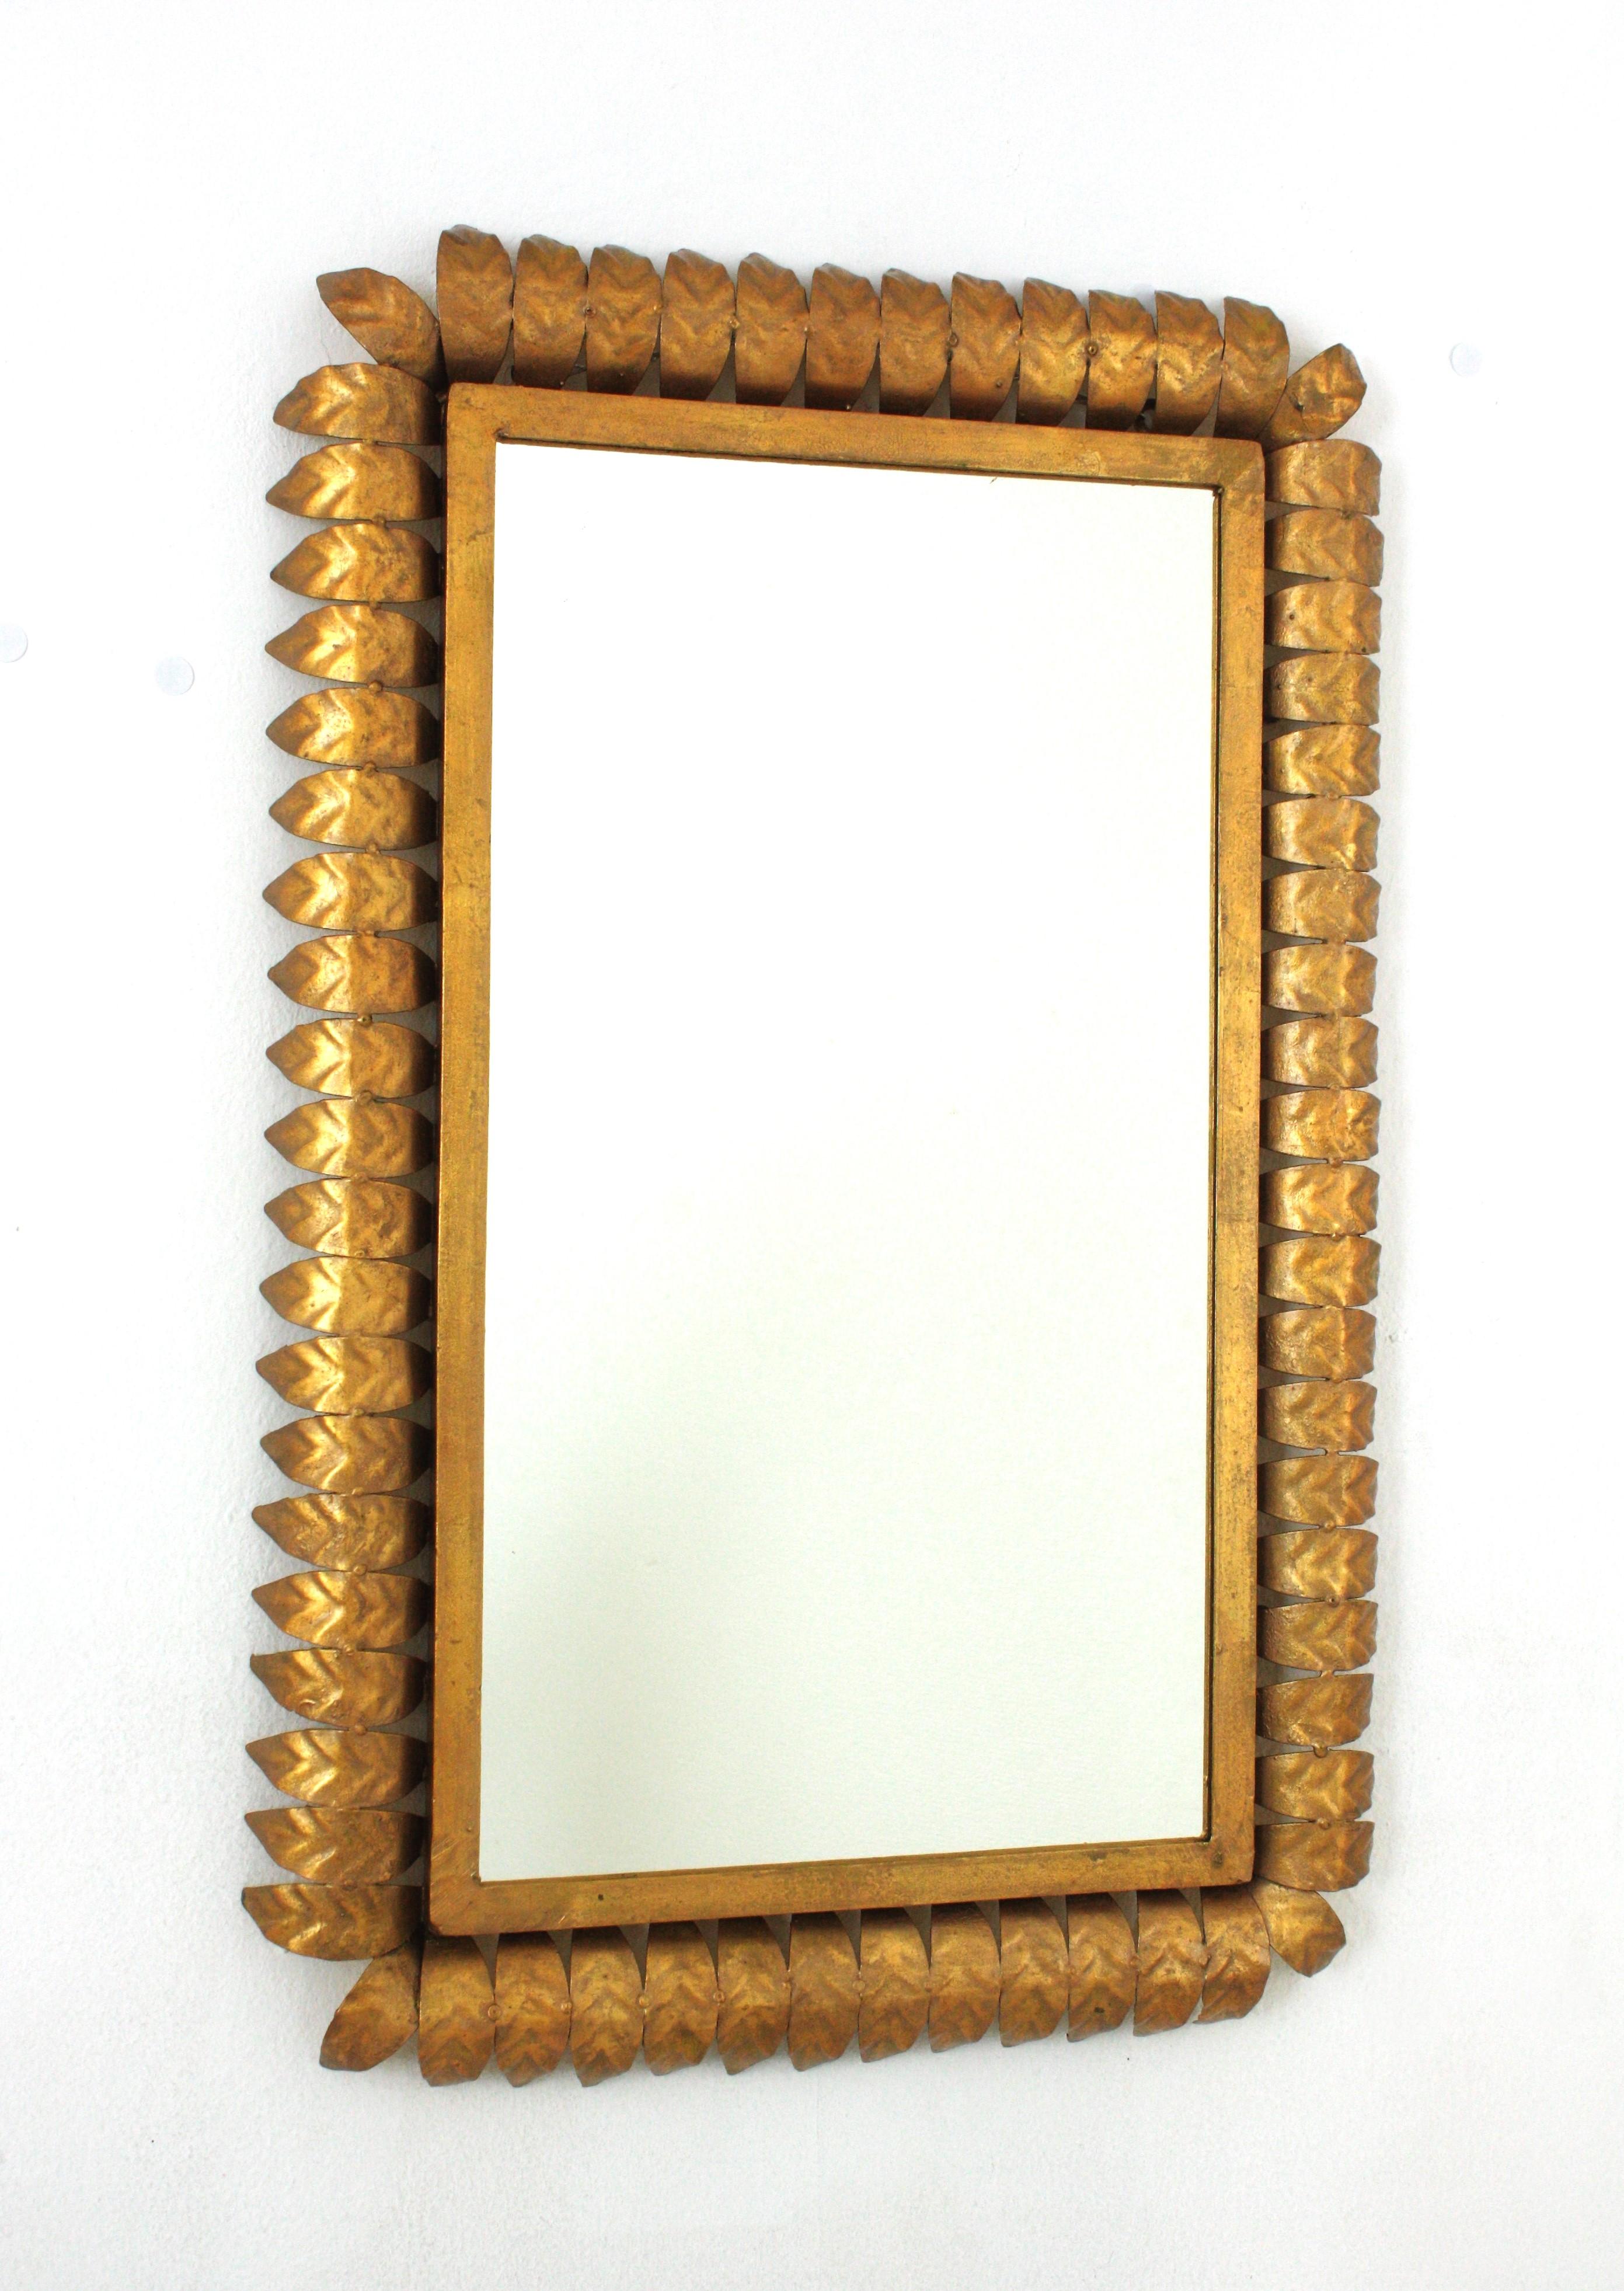 Wrought Gilt iron sunburst rectangular wall mirror with gold leaf finish, Spain, 1950s.
Highly decorative rectangular leaf framed sunburst mirror with gold leaf gilding.
Entirely made by hand. Twisted iron rope and eye-catching jagged edge